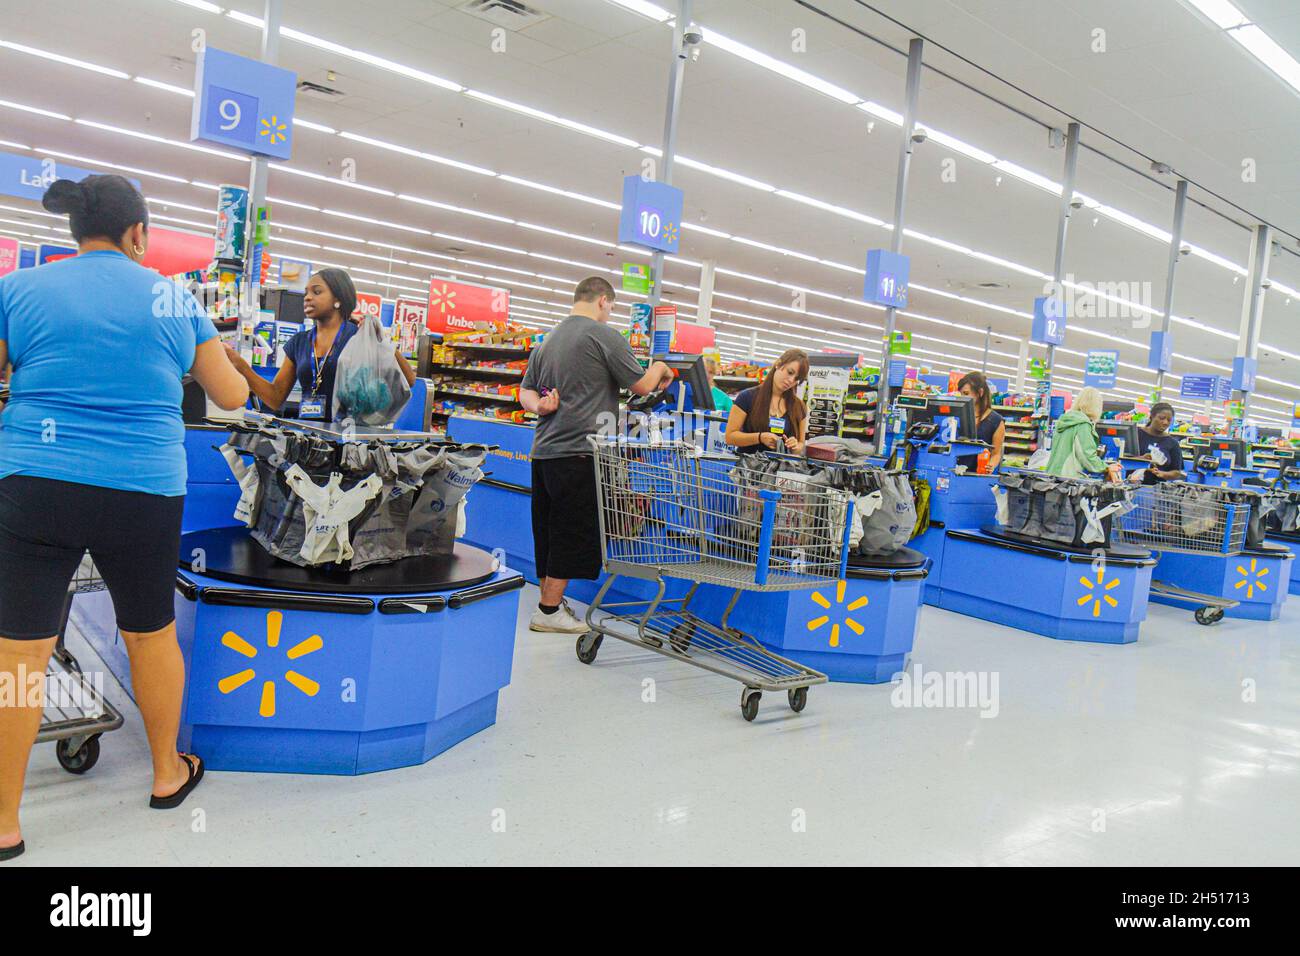 Naples Florida,Walmart Big-Box discount,shopping shoppers market marketplace store checkout line queue cashier cashiers customer employees workers Stock Photo